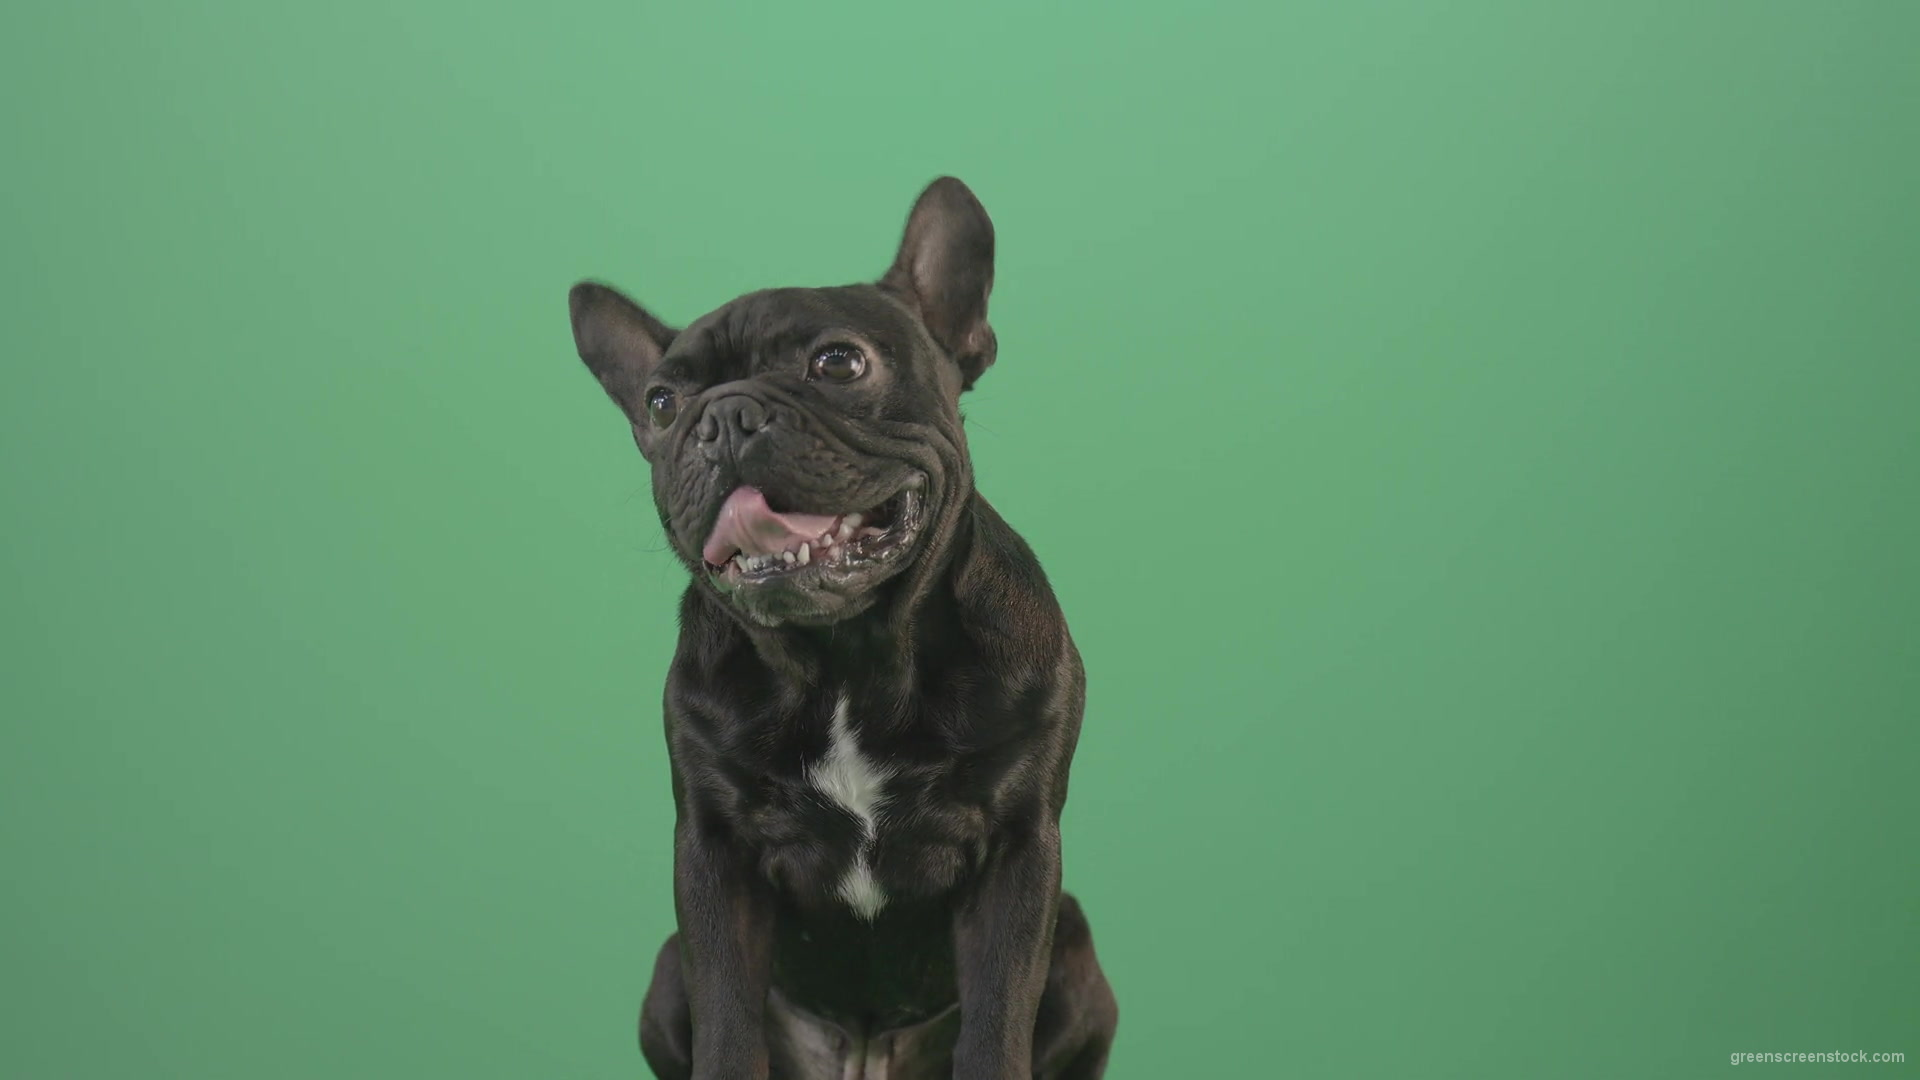 Hard-breathing-french-black-bull-dog-over-green-screen-4K-Video-Footage-1920_009 Green Screen Stock